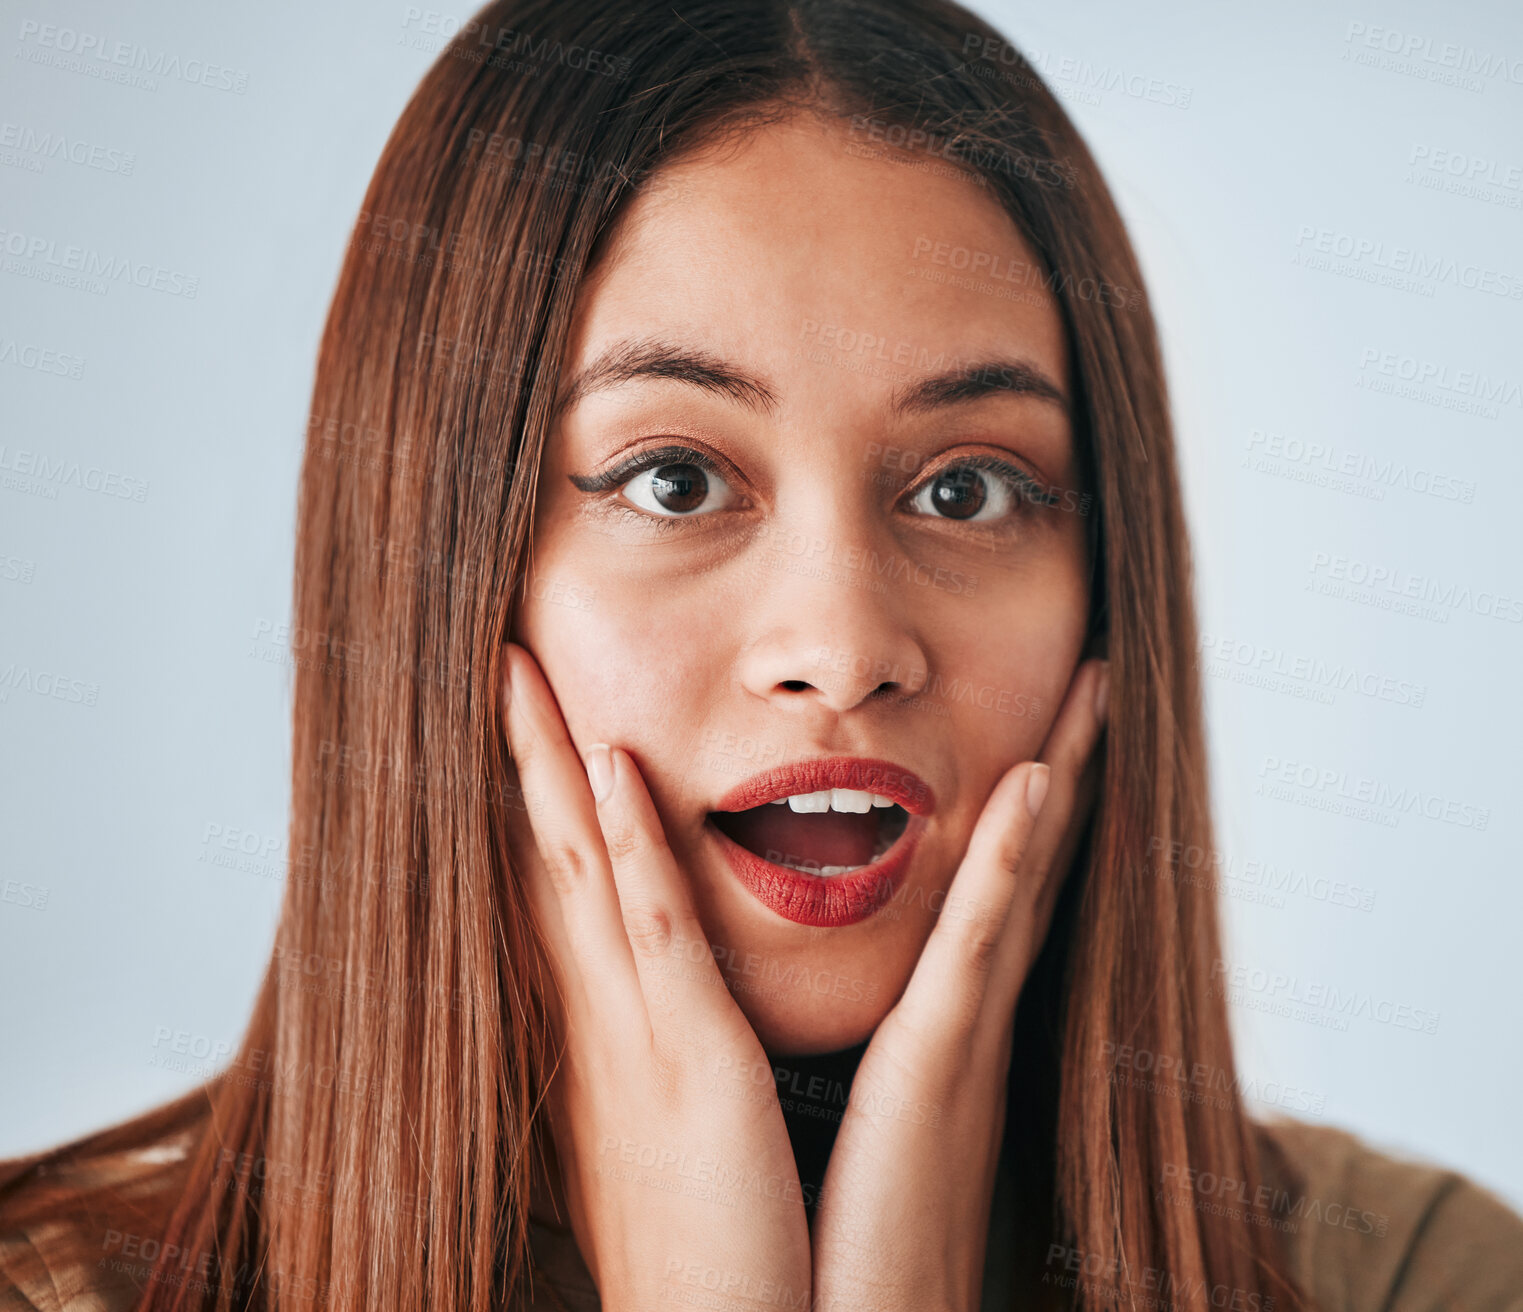 Buy stock photo Shock, expression and portrait of a woman with a reaction isolated on a white background in a studio. Wow, unexpected and face of a girl expressing surprise, amazement and fear emotion on a backdrop